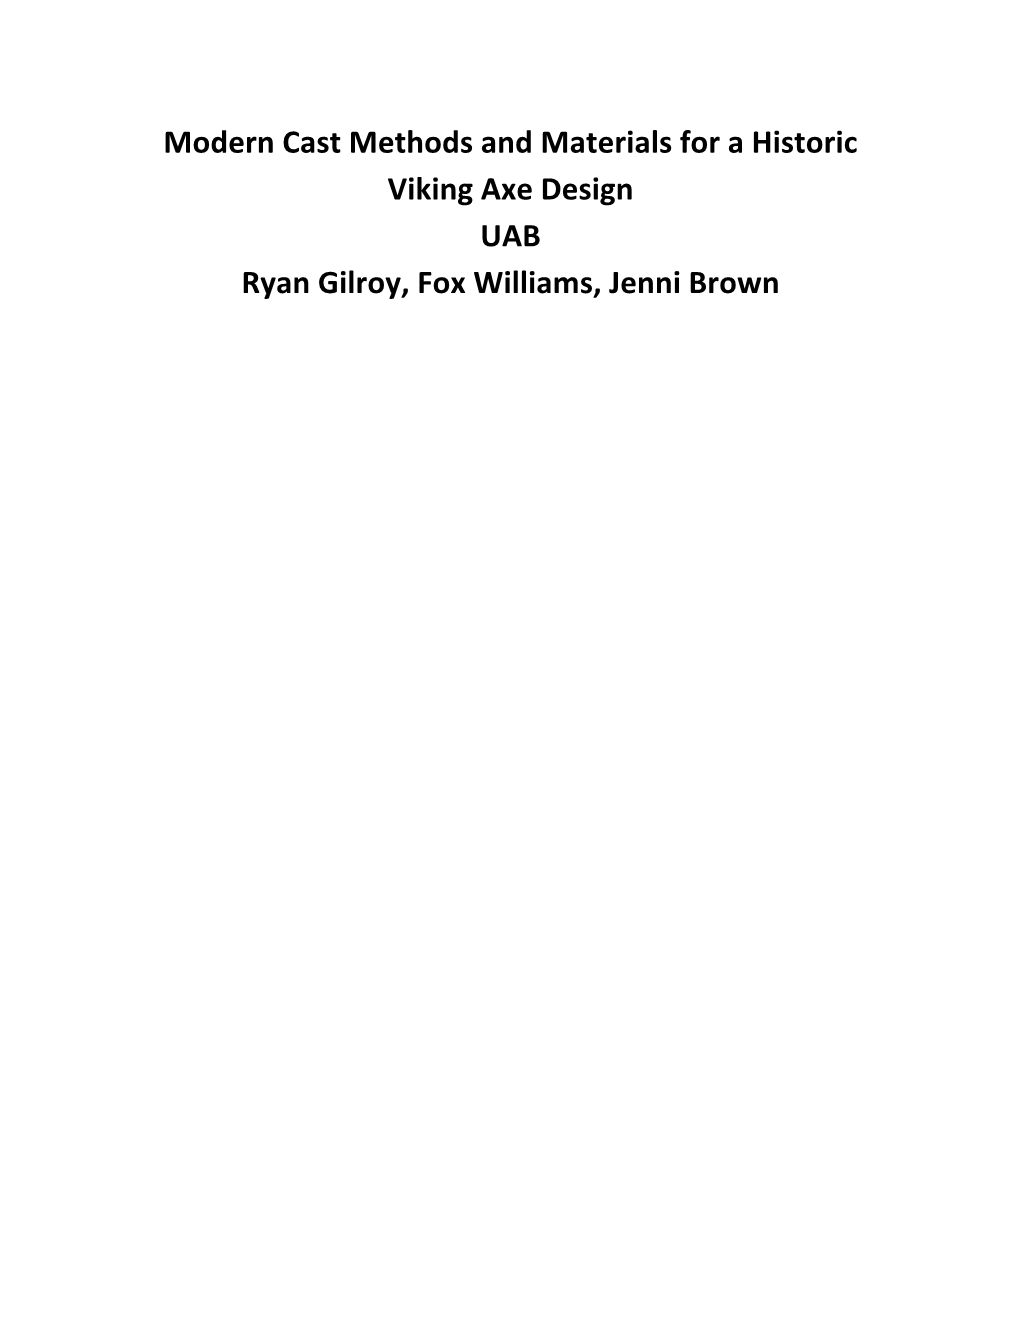 Modern Cast Methods and Materials for a Historic Viking Axe Design UAB Ryan Gilroy, Fox Williams, Jenni Brown